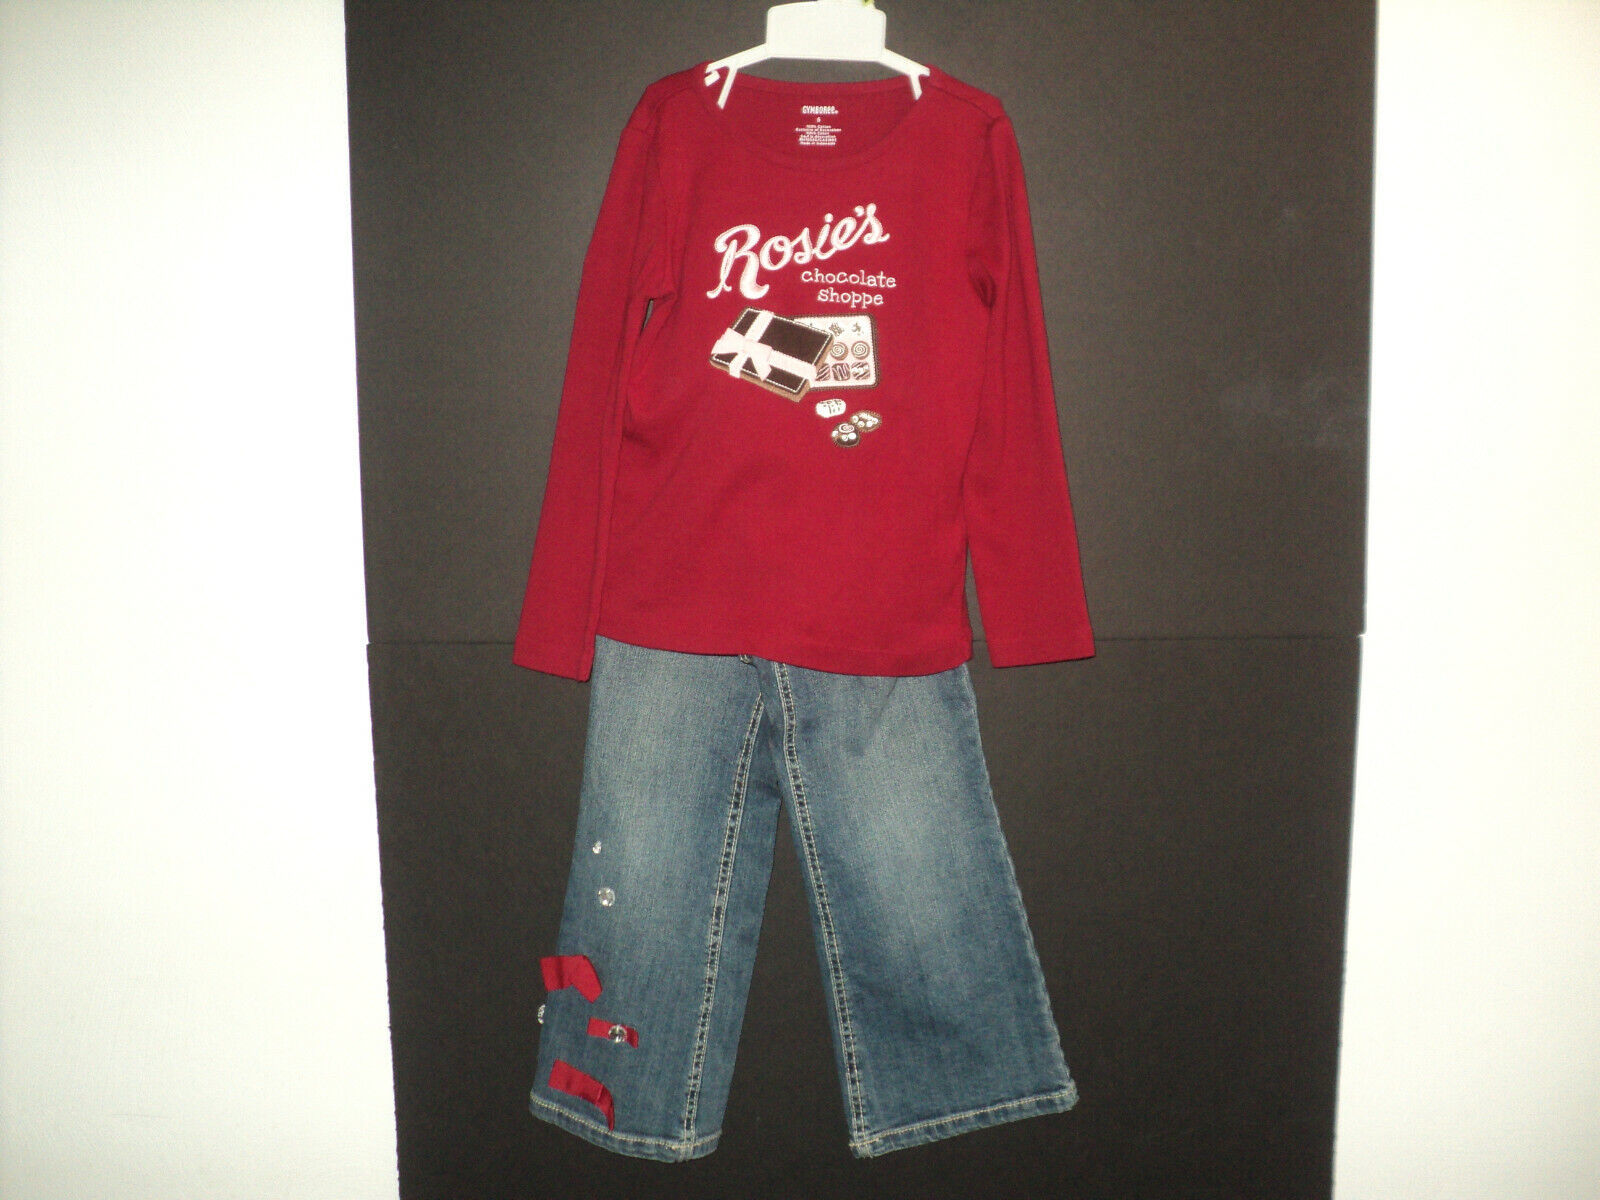 Primary image for Gymboree Sweet Treats Rosie's Chocolate Shoppe Sz 5 Red Shirt, 5 Plus Jeans Set